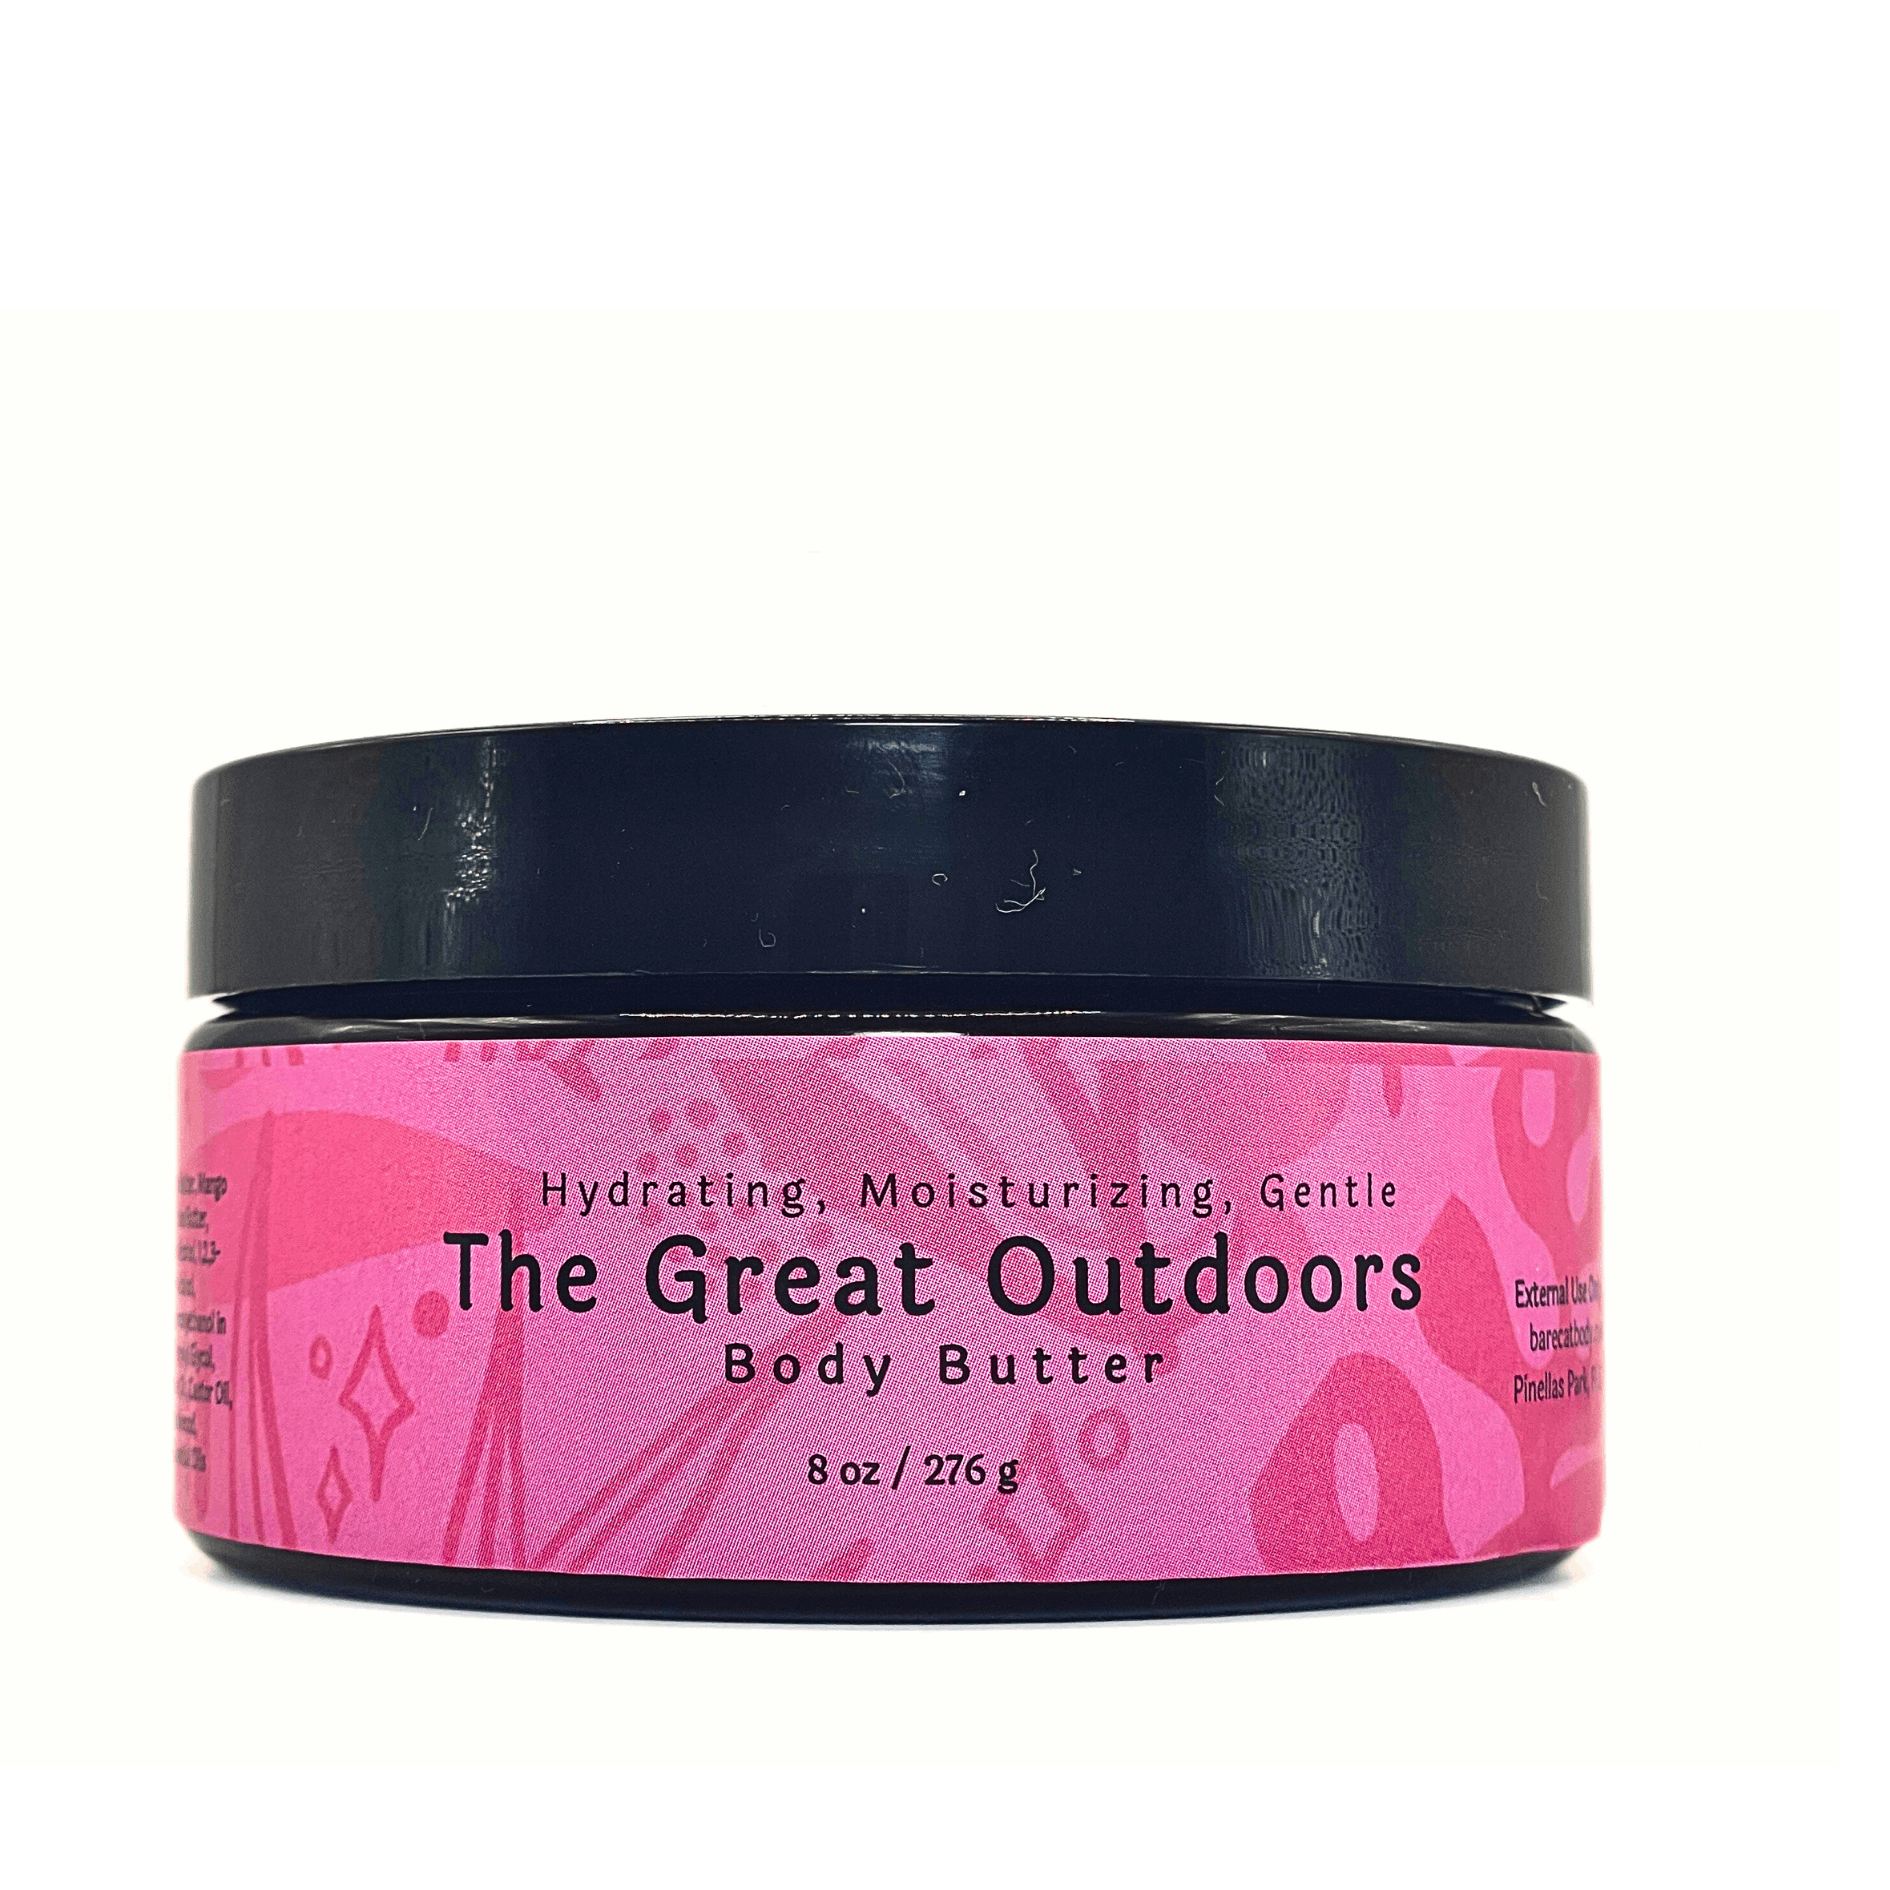 Great Outdoors Body Butter jar showcasing its rich texture infused with Vanilla, Cedarwood, and Ylang Ylang.